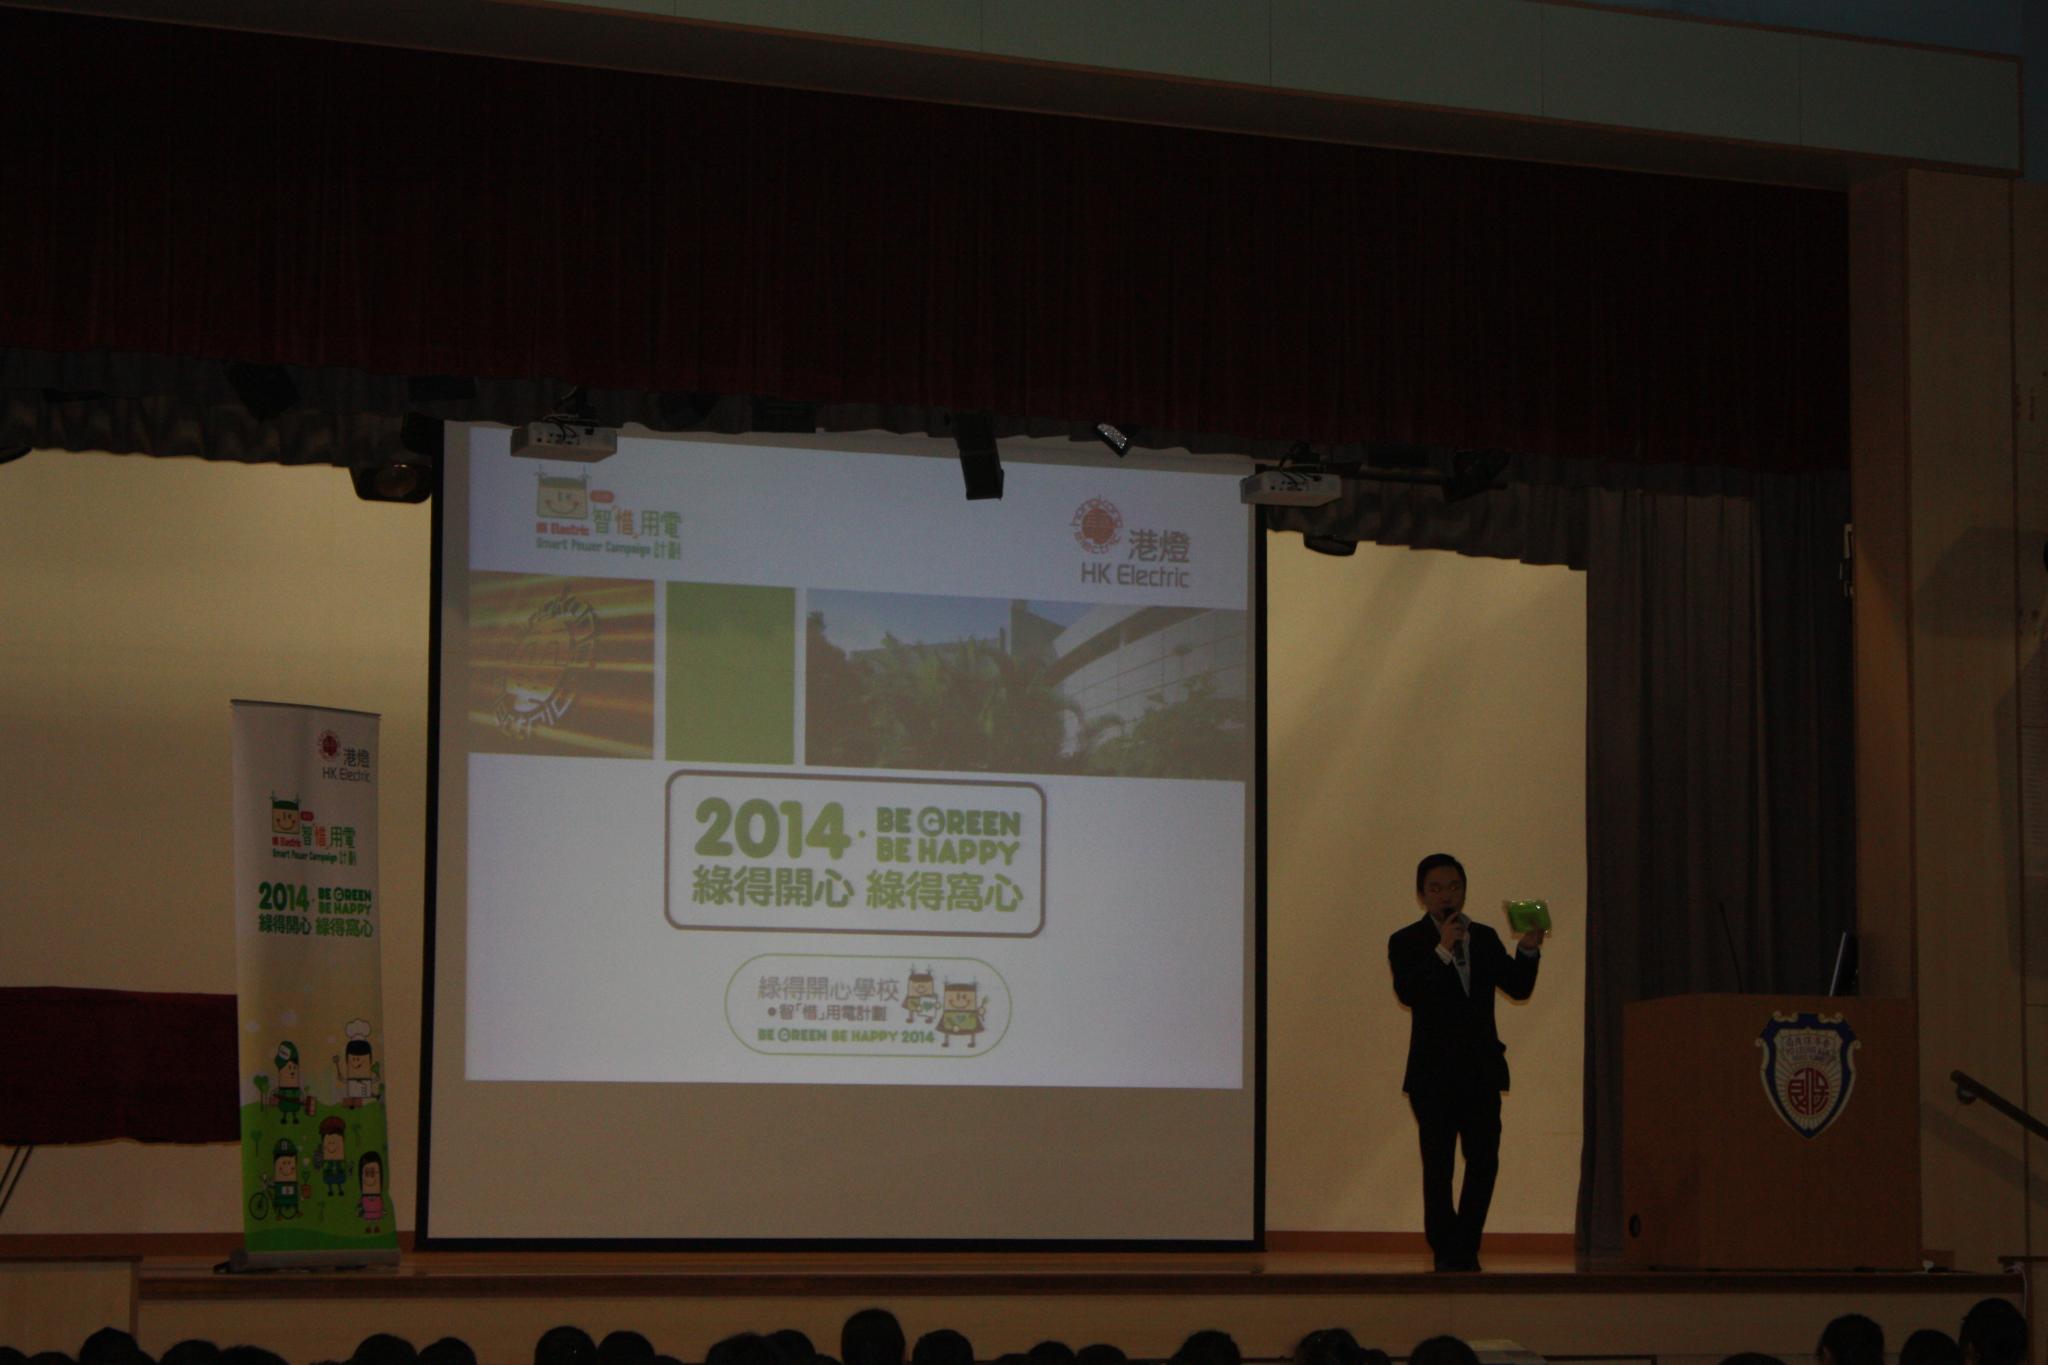 The speaker from HK Electric is introducing the concept of 'Be Green Be Happy 2014'.